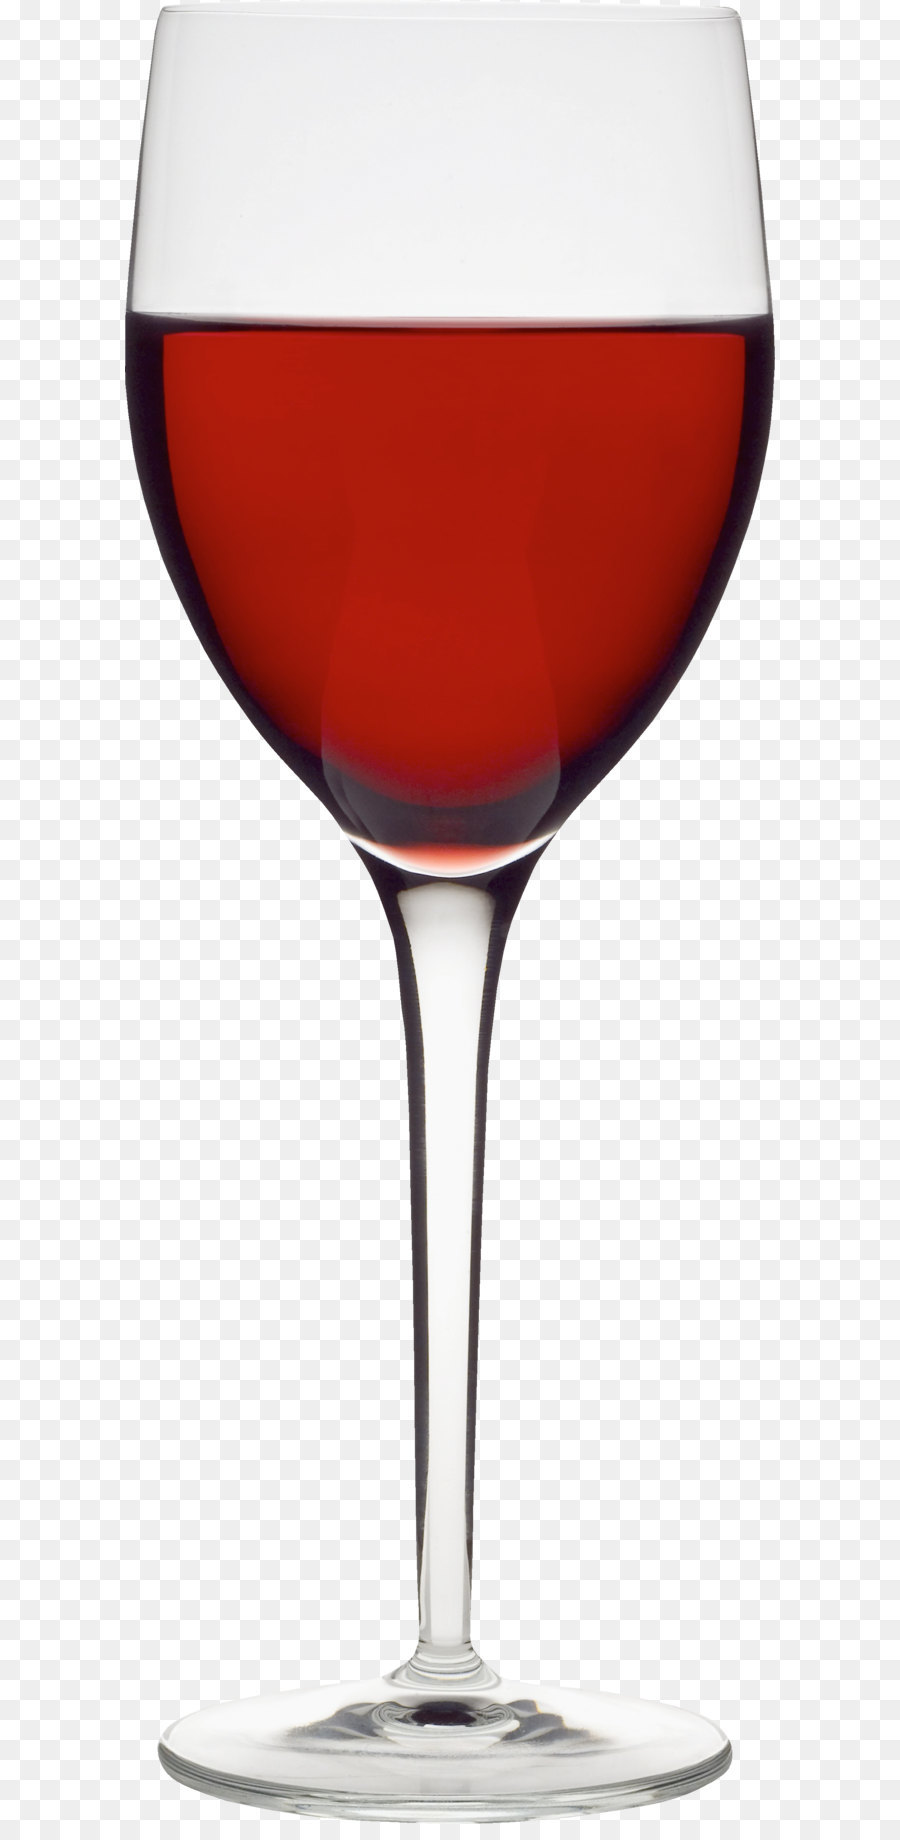 Red Wine Wine glass Cocktail Champagne - Glass PNG image png download - 1688*4737 - Free Transparent Red Wine png Download.